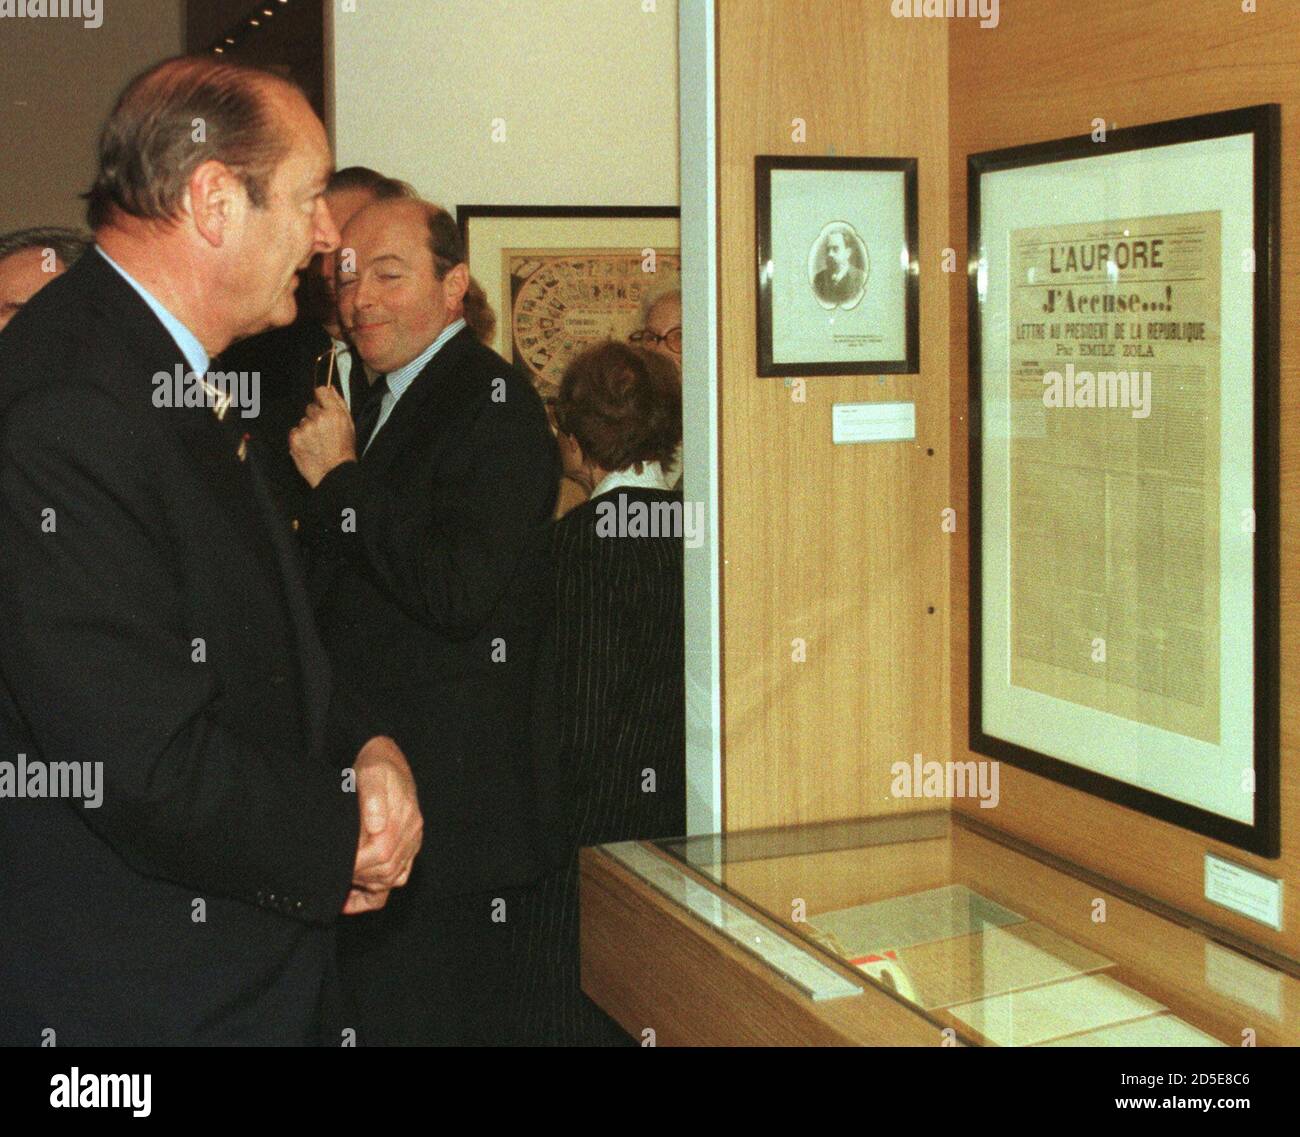 French President Jacques Chirac (L) looks at the the French Newspaper ' L'Aurore' published on January 13 1897 featuring the letter by French writer Emile Zola, with the ' J'Accuse' (I accuse) headline, in defence of the French Jewish army captain Alfred Dreyfus, wrongly accused of treason, as he inaugurates the new 'Museum of Judaism' in the heart of the Paris Jewish quarter November 30. The museum which has a collection of paintings, photographs and artifacts will open its doors to the public on December 6.  GW//AA Stock Photo